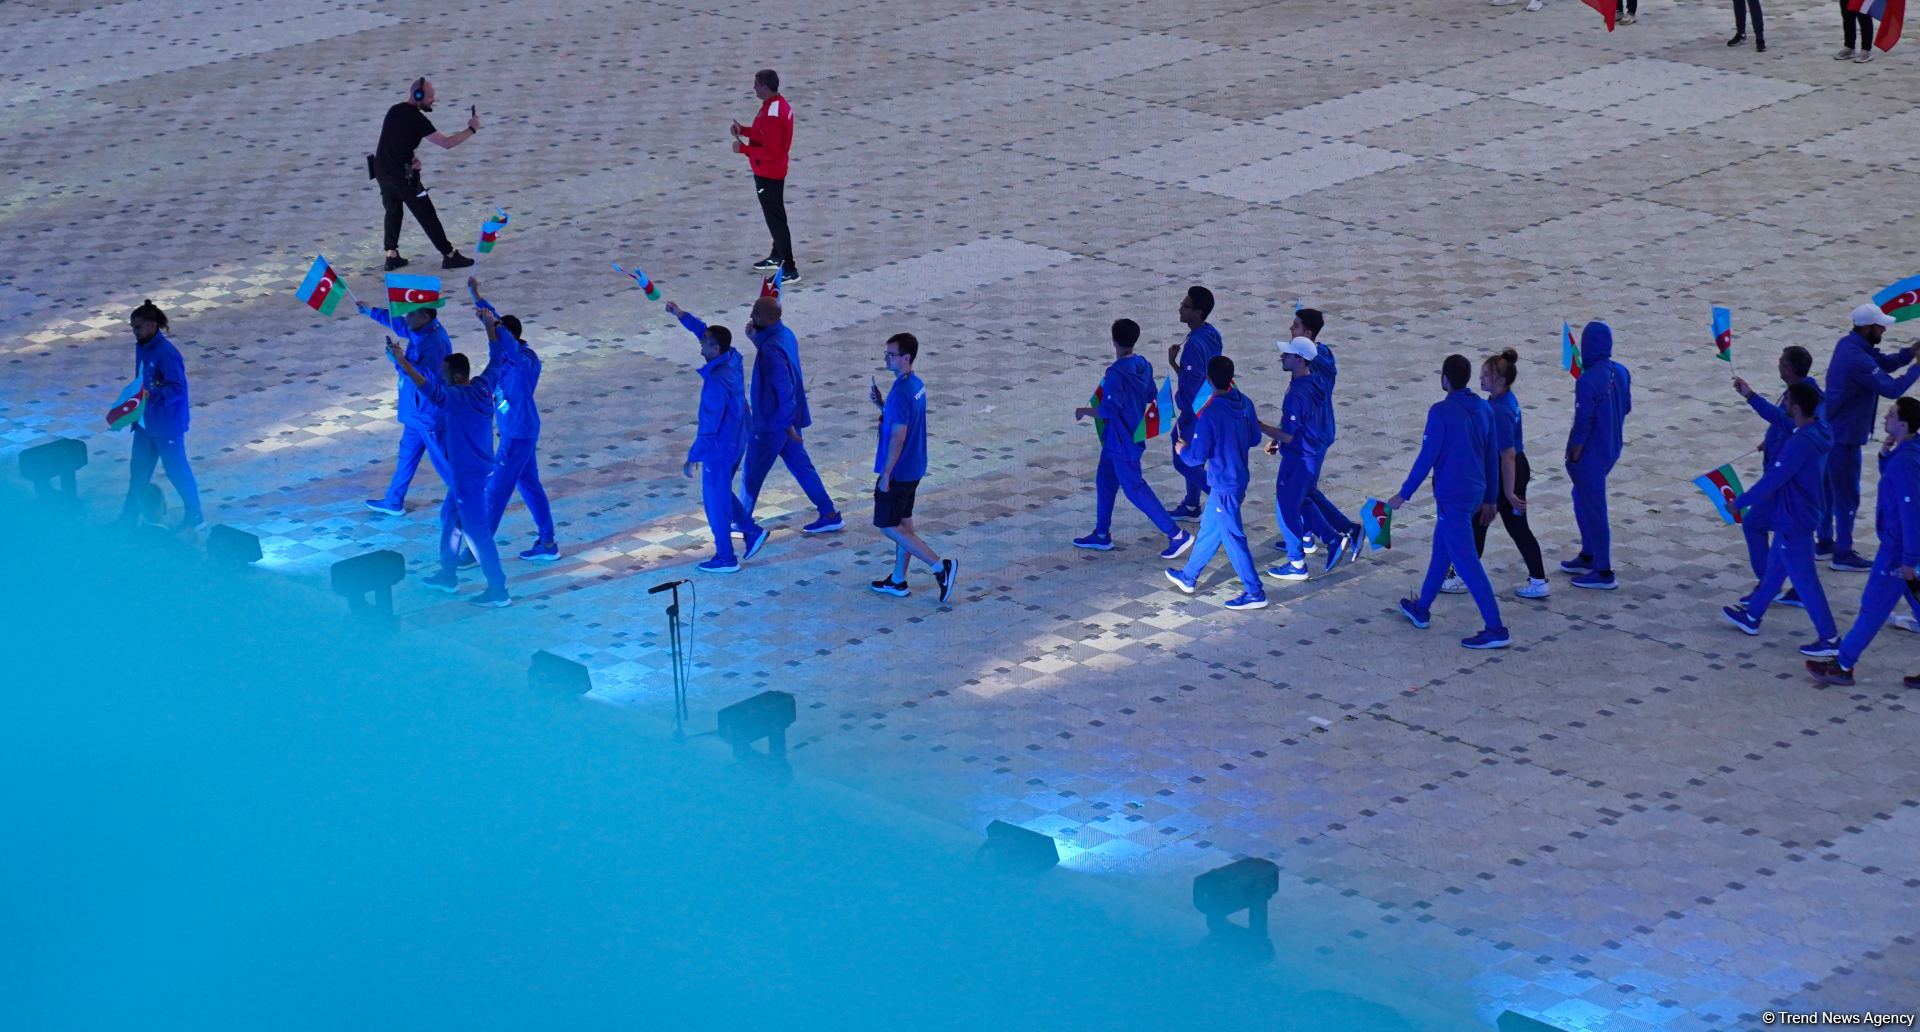 Poland holds closing ceremony for III European Games (PHOTO)